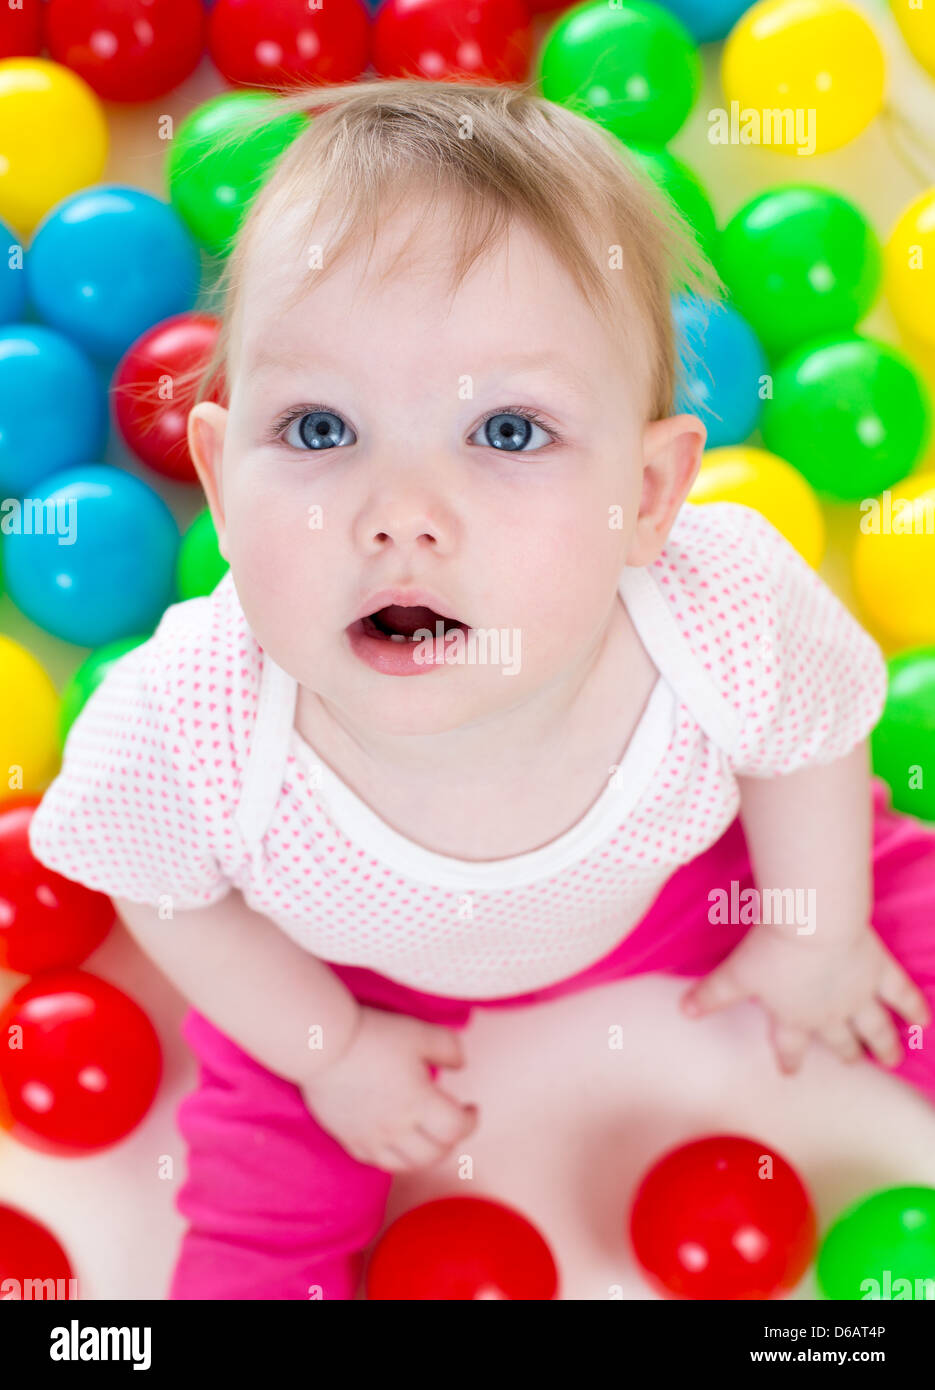 Portrait of funny baby playing among colorful balls Stock Photo